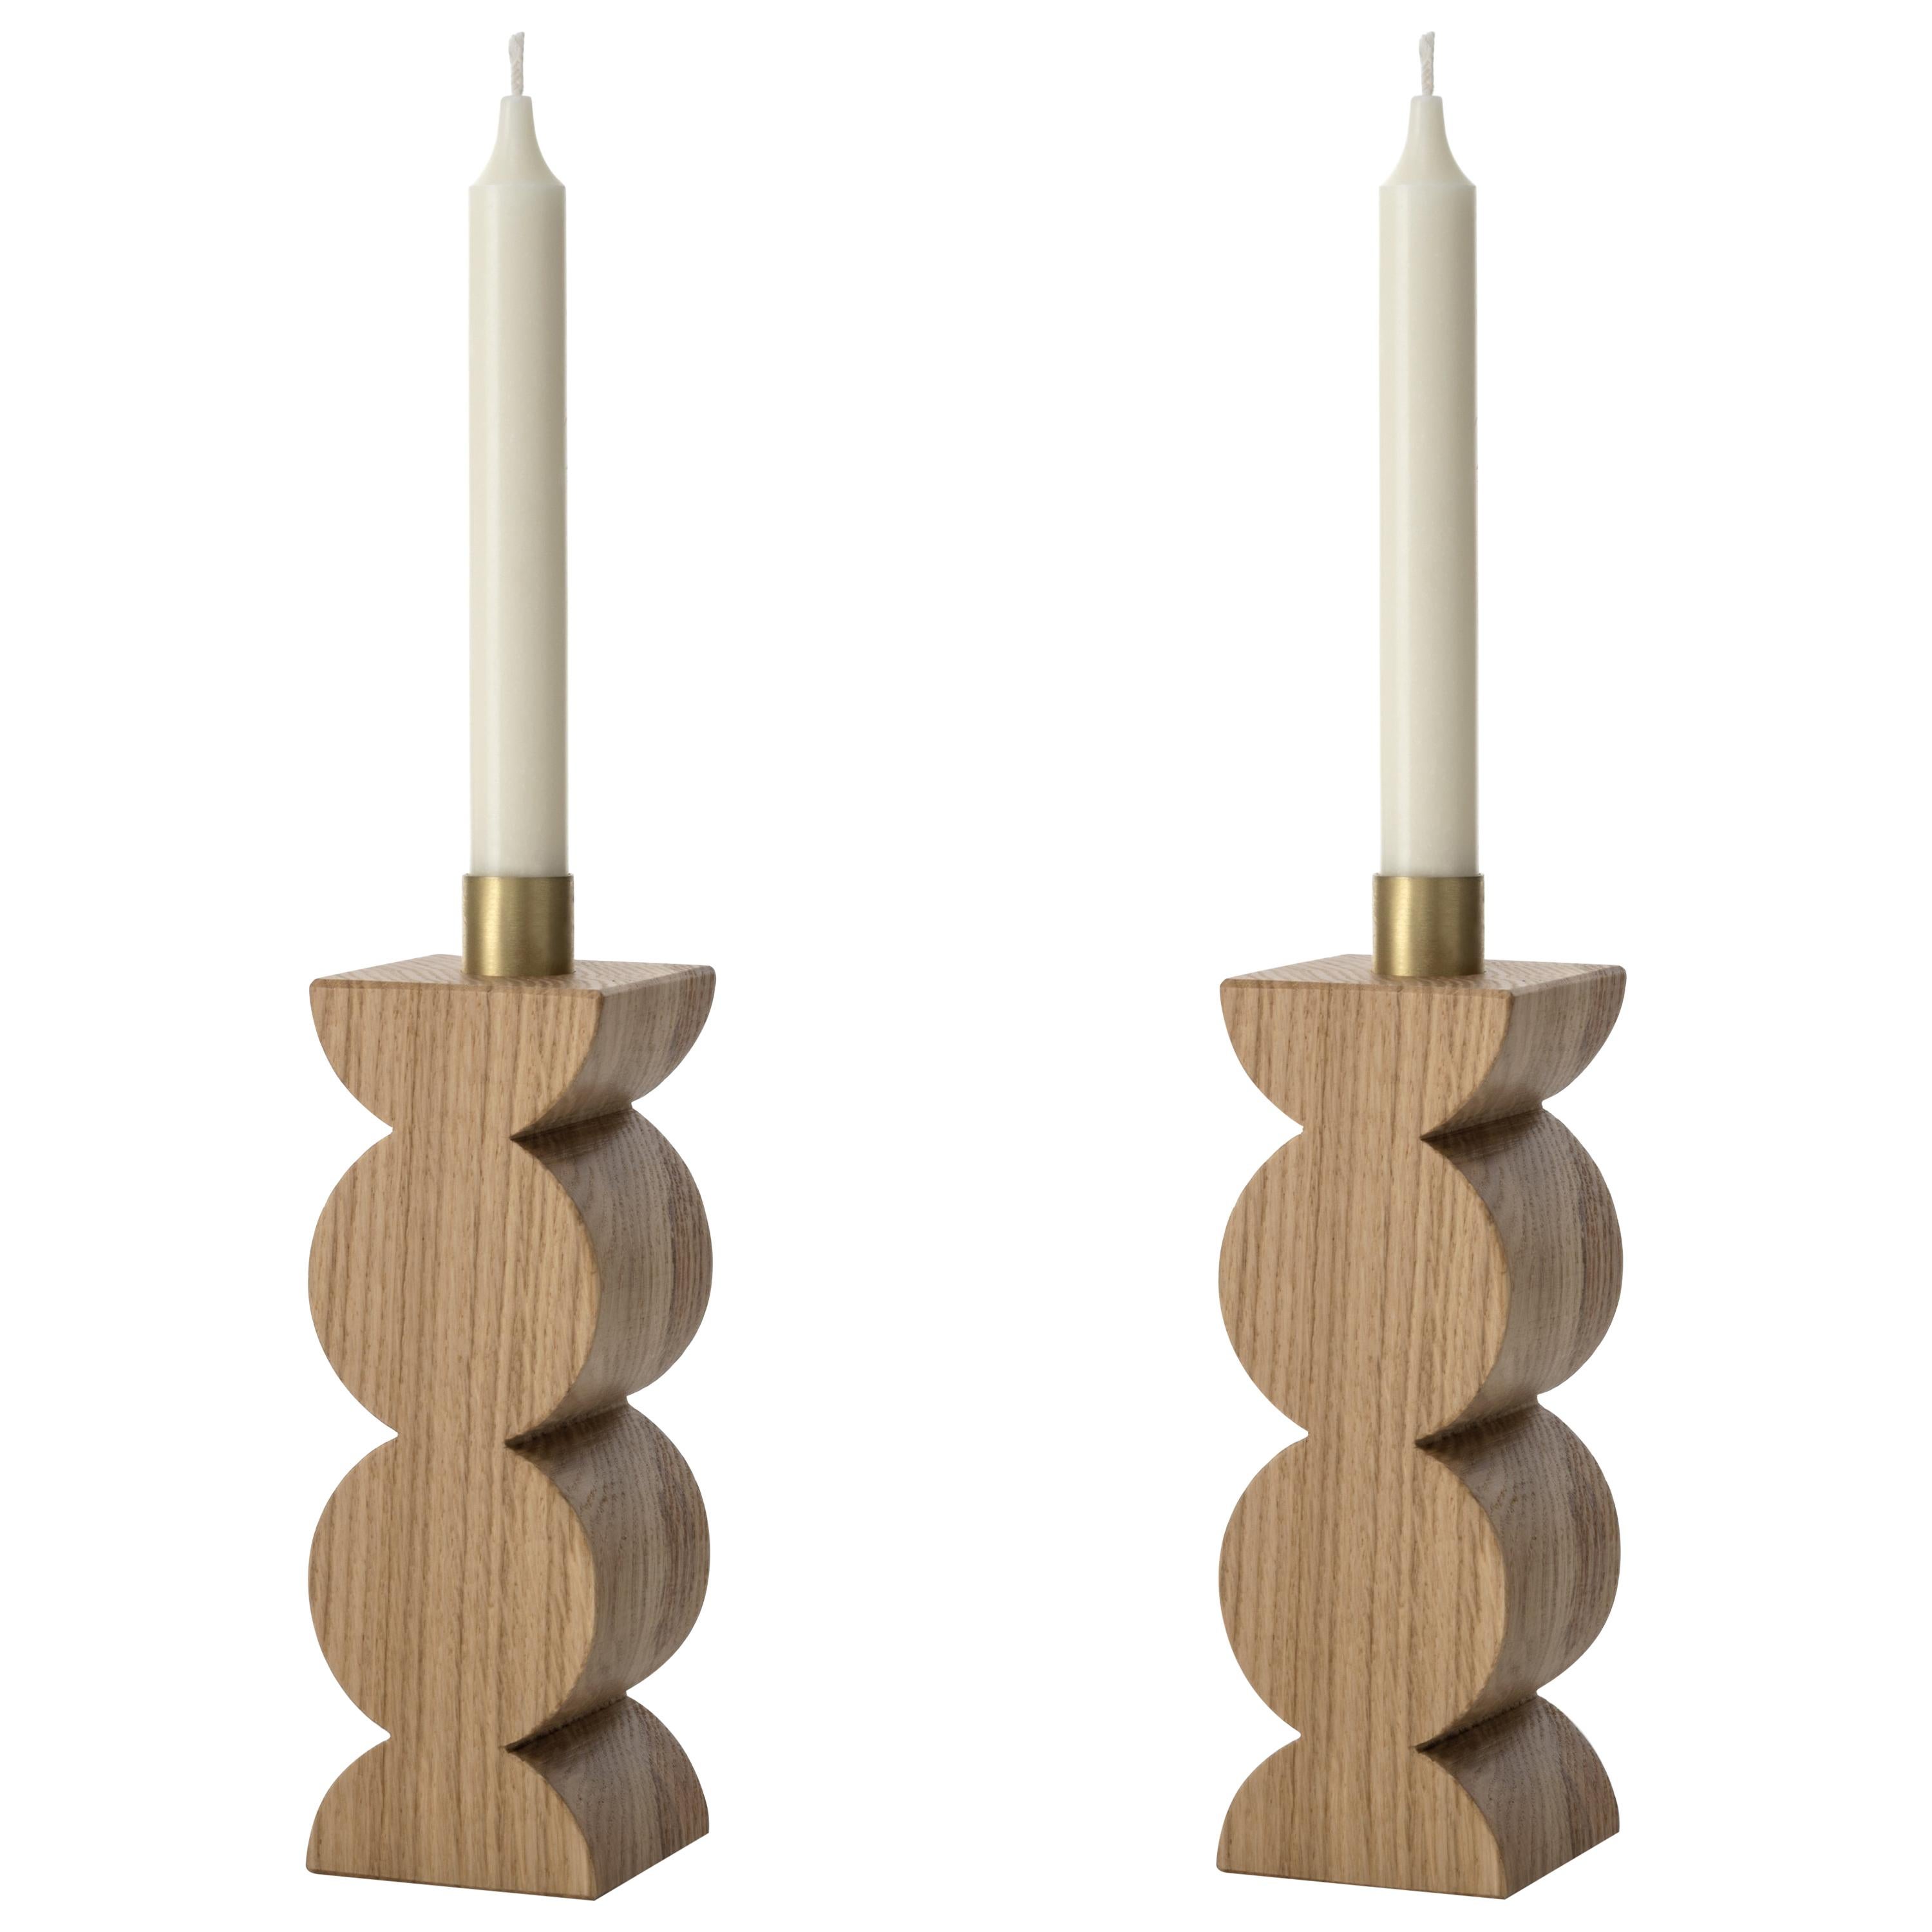 Constantin i Set of Two Candleholders in Solid Oak and Brass with Circles